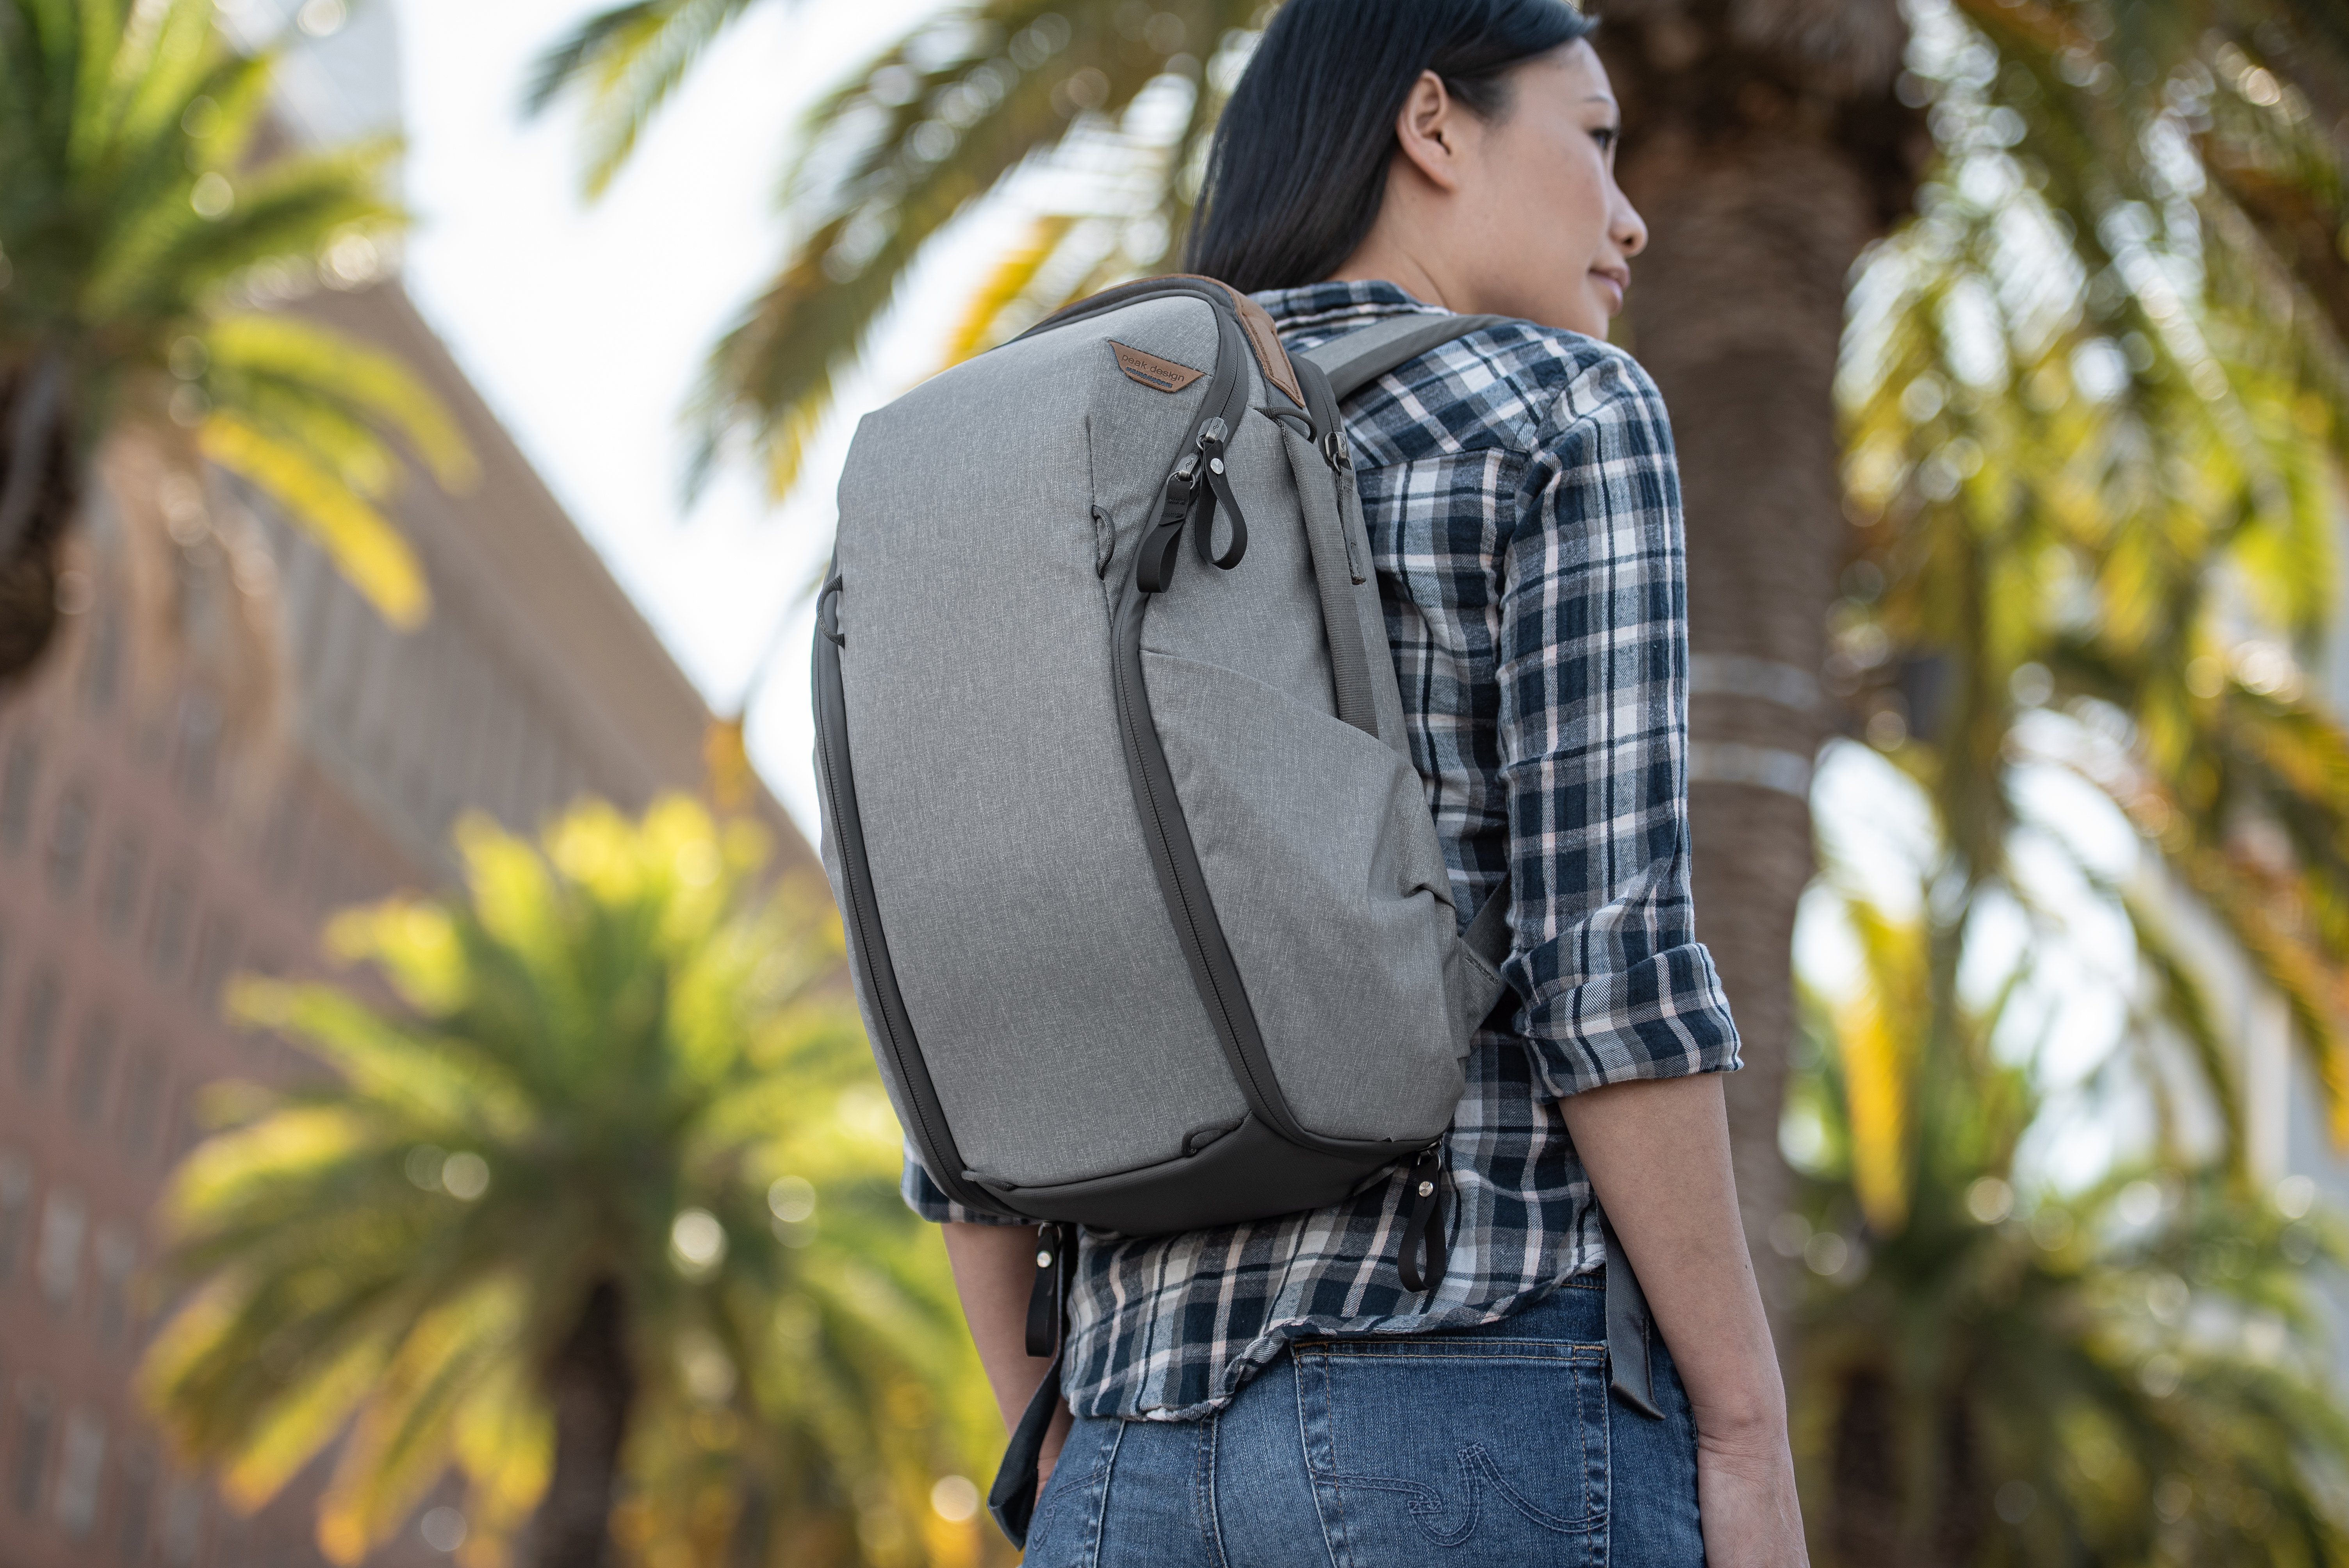 Peak Design Updates Everyday Line of Camera Bags with New Styles, Features, and Colors